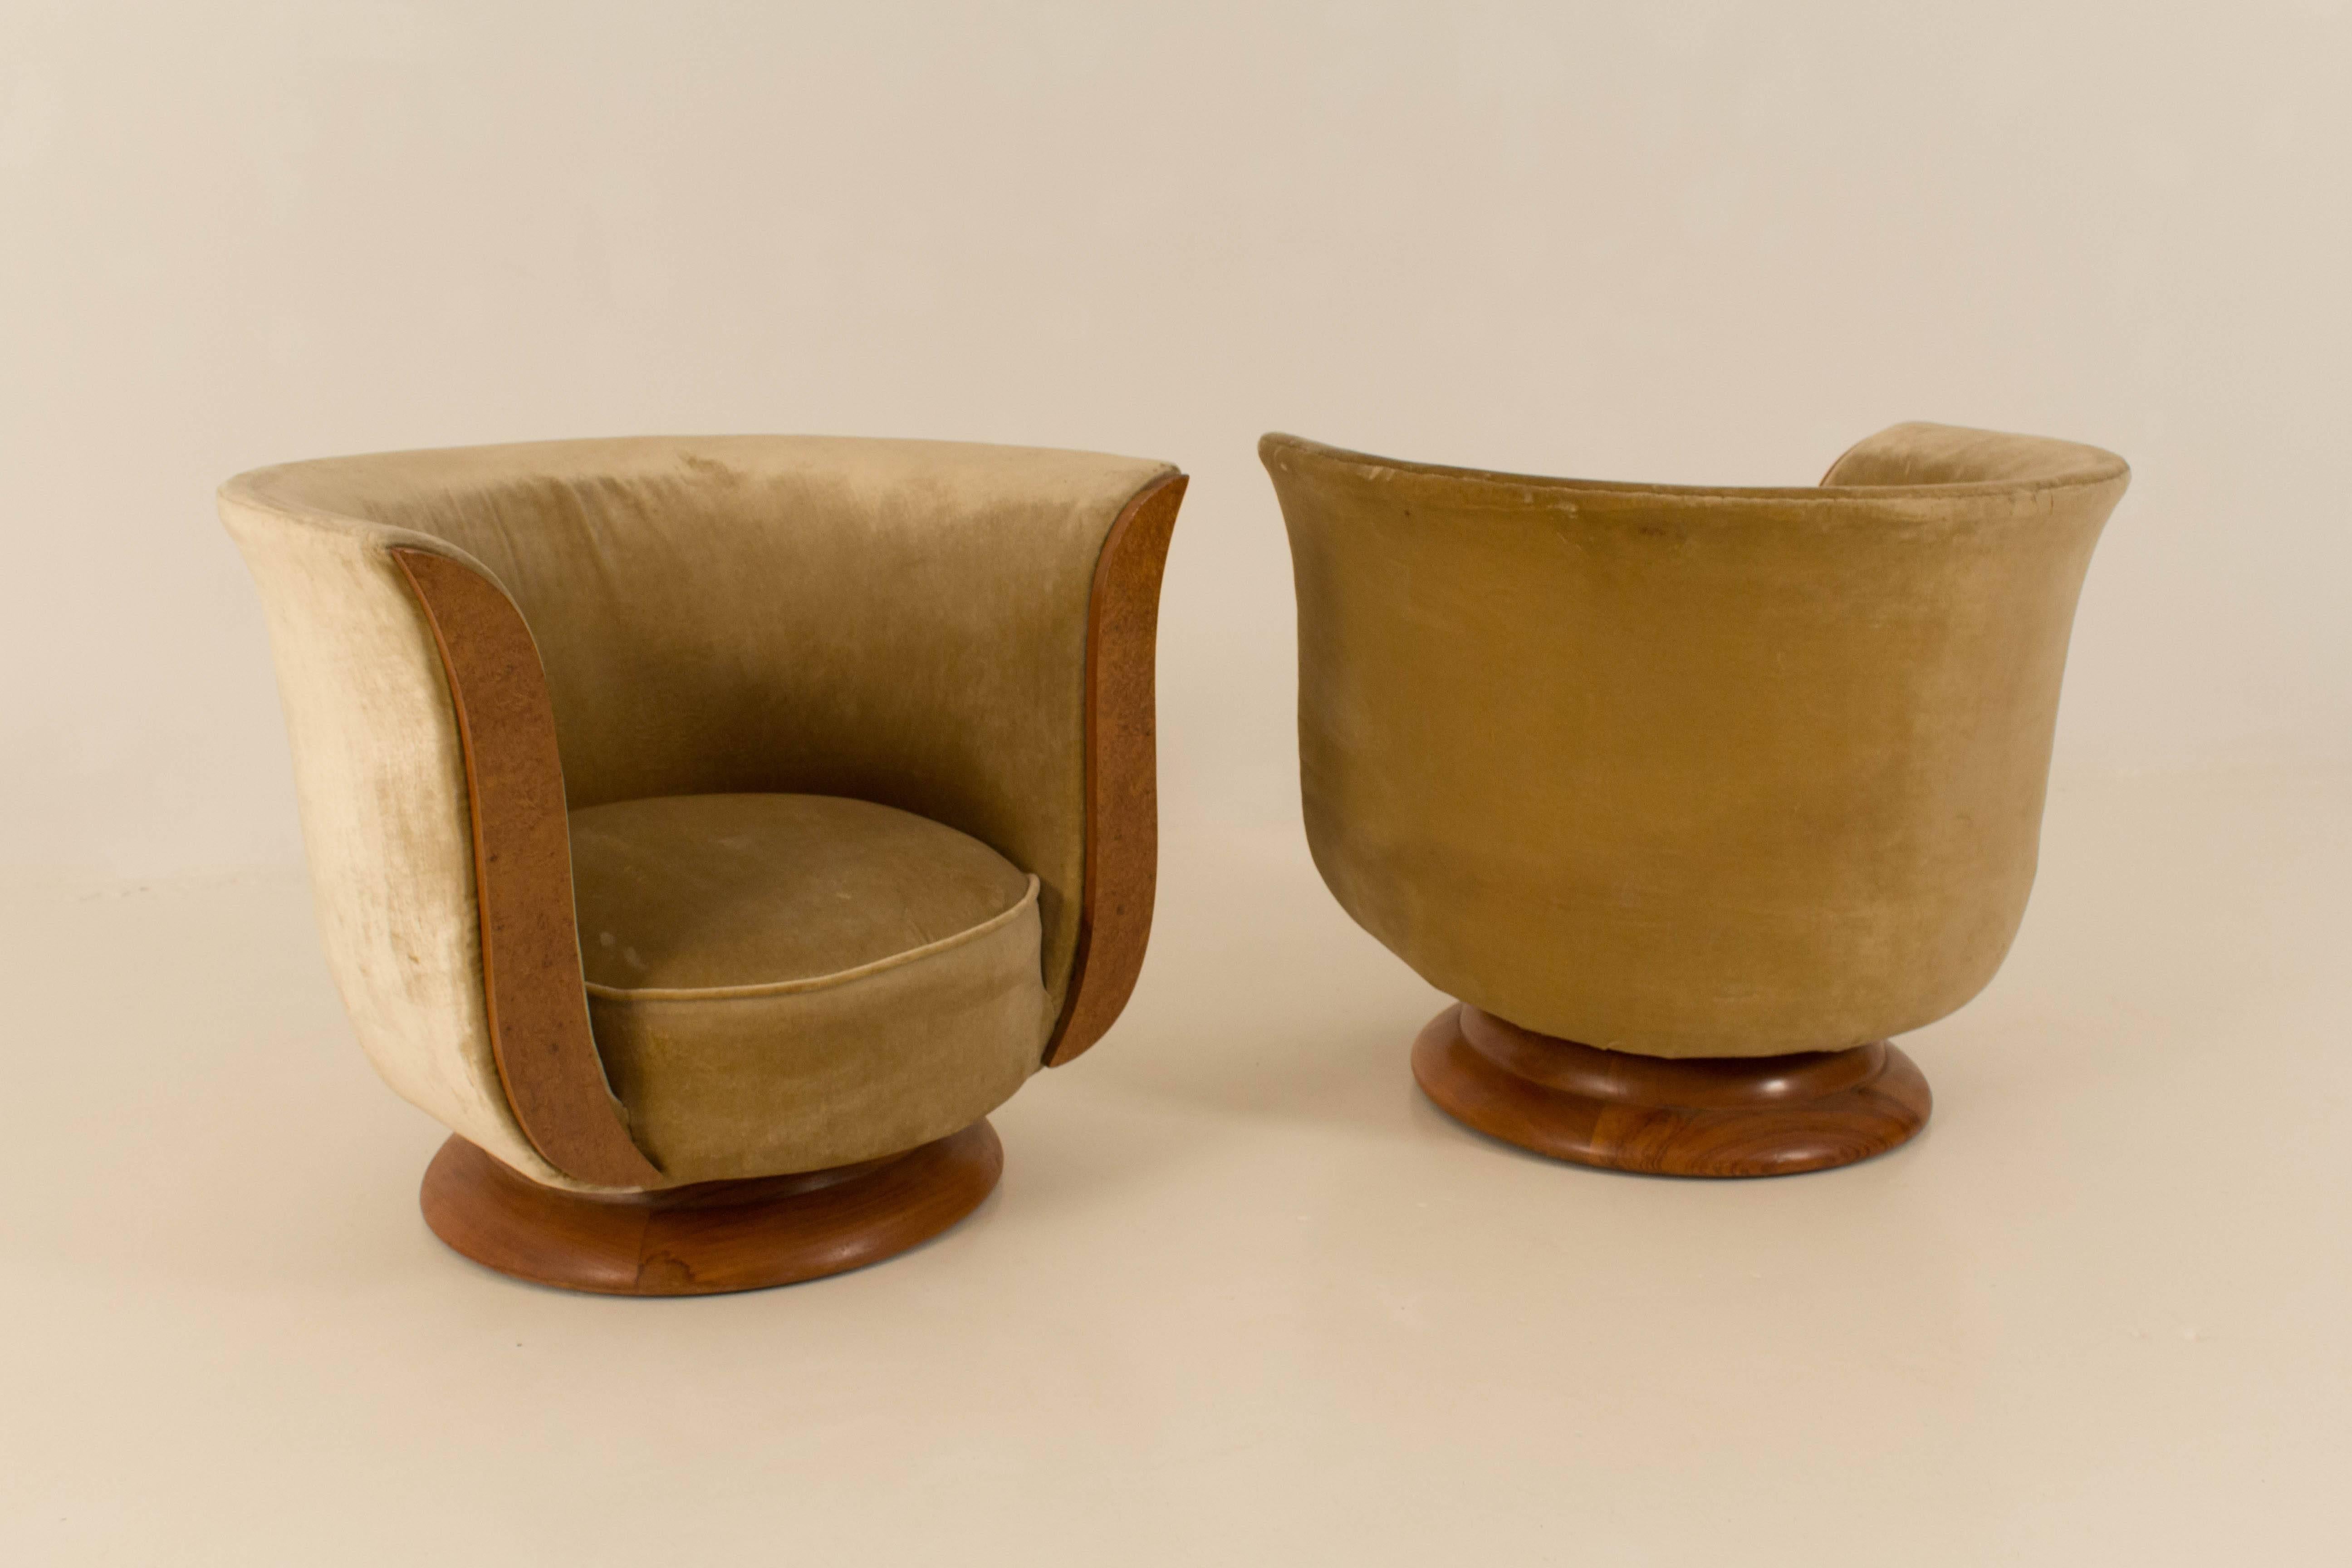 Burl Stunning Pair Of Art Deco Lounge Chairs For Hotel Le Malandre 1930s